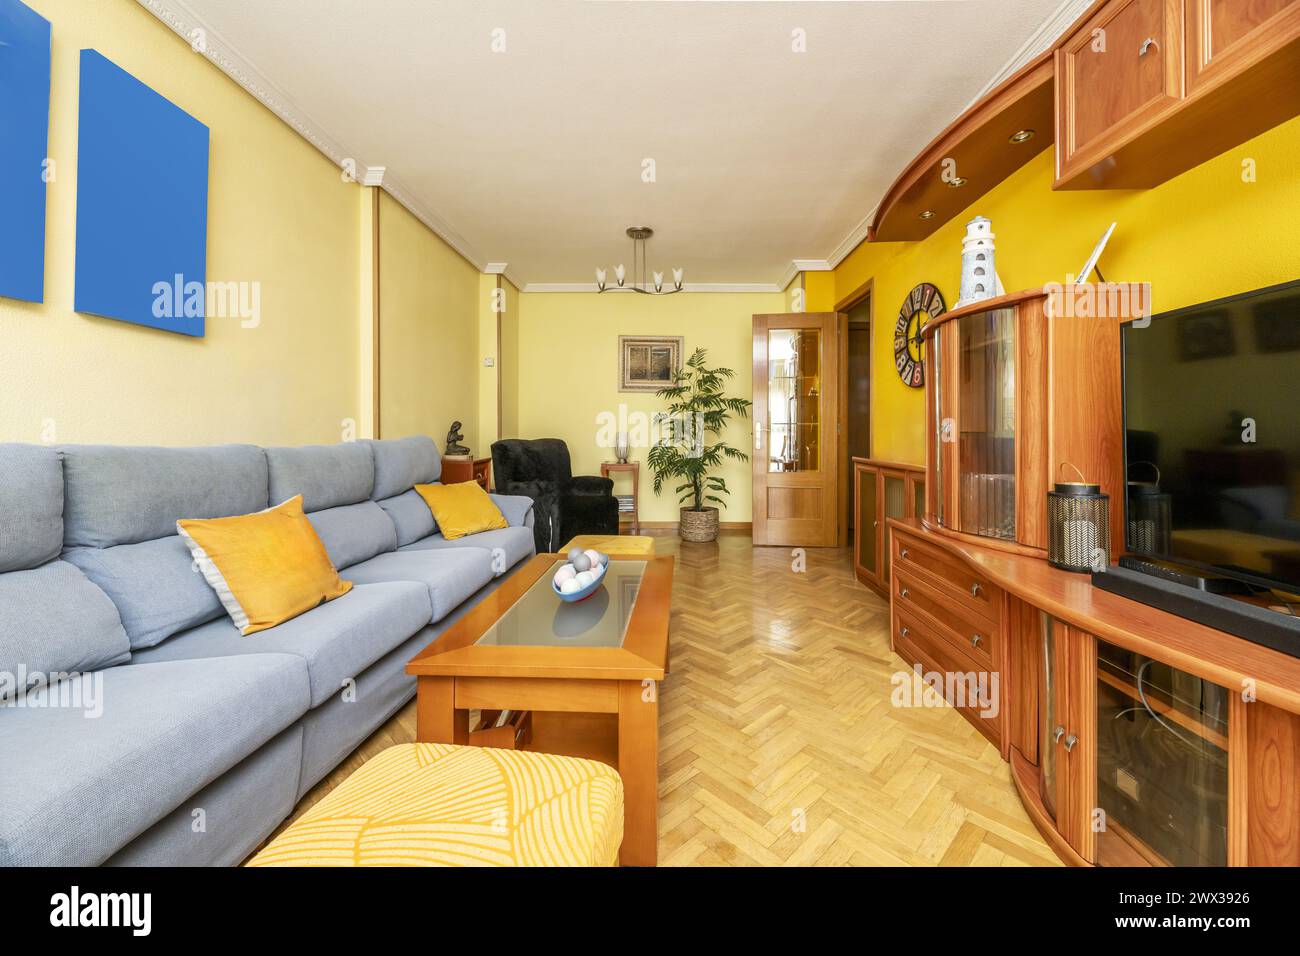 Conventional living room with a long green fabric sofa, a wooden sideboard and walls painted in various shades of yellow Stock Photo